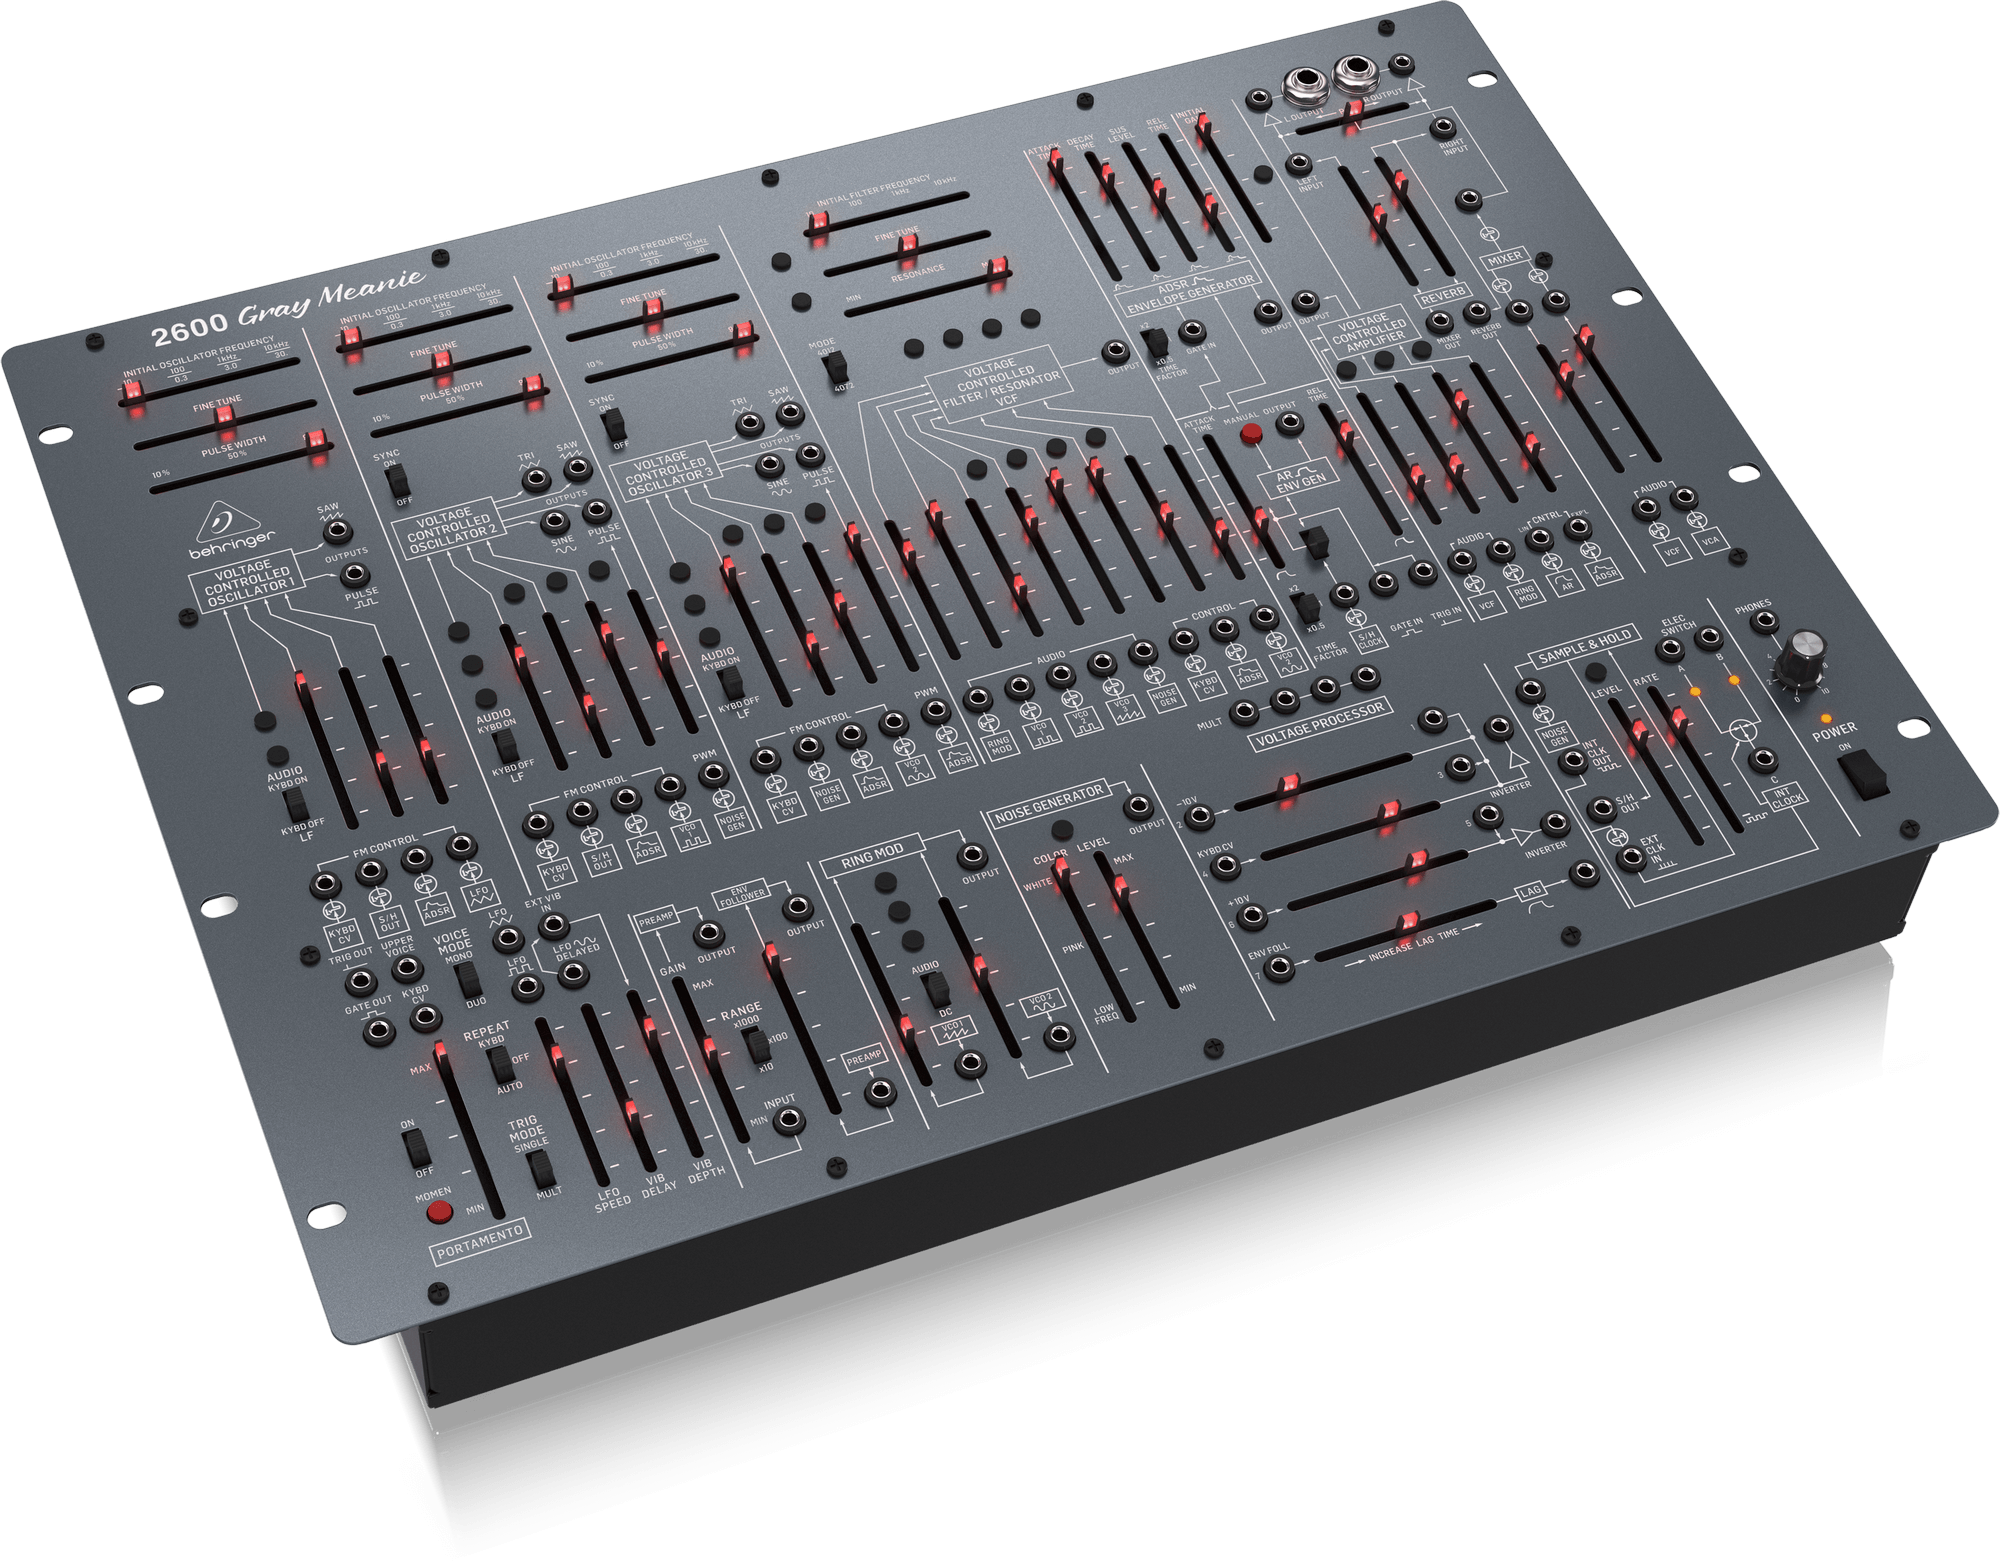 Behringer | Product | GRAY MEANIE